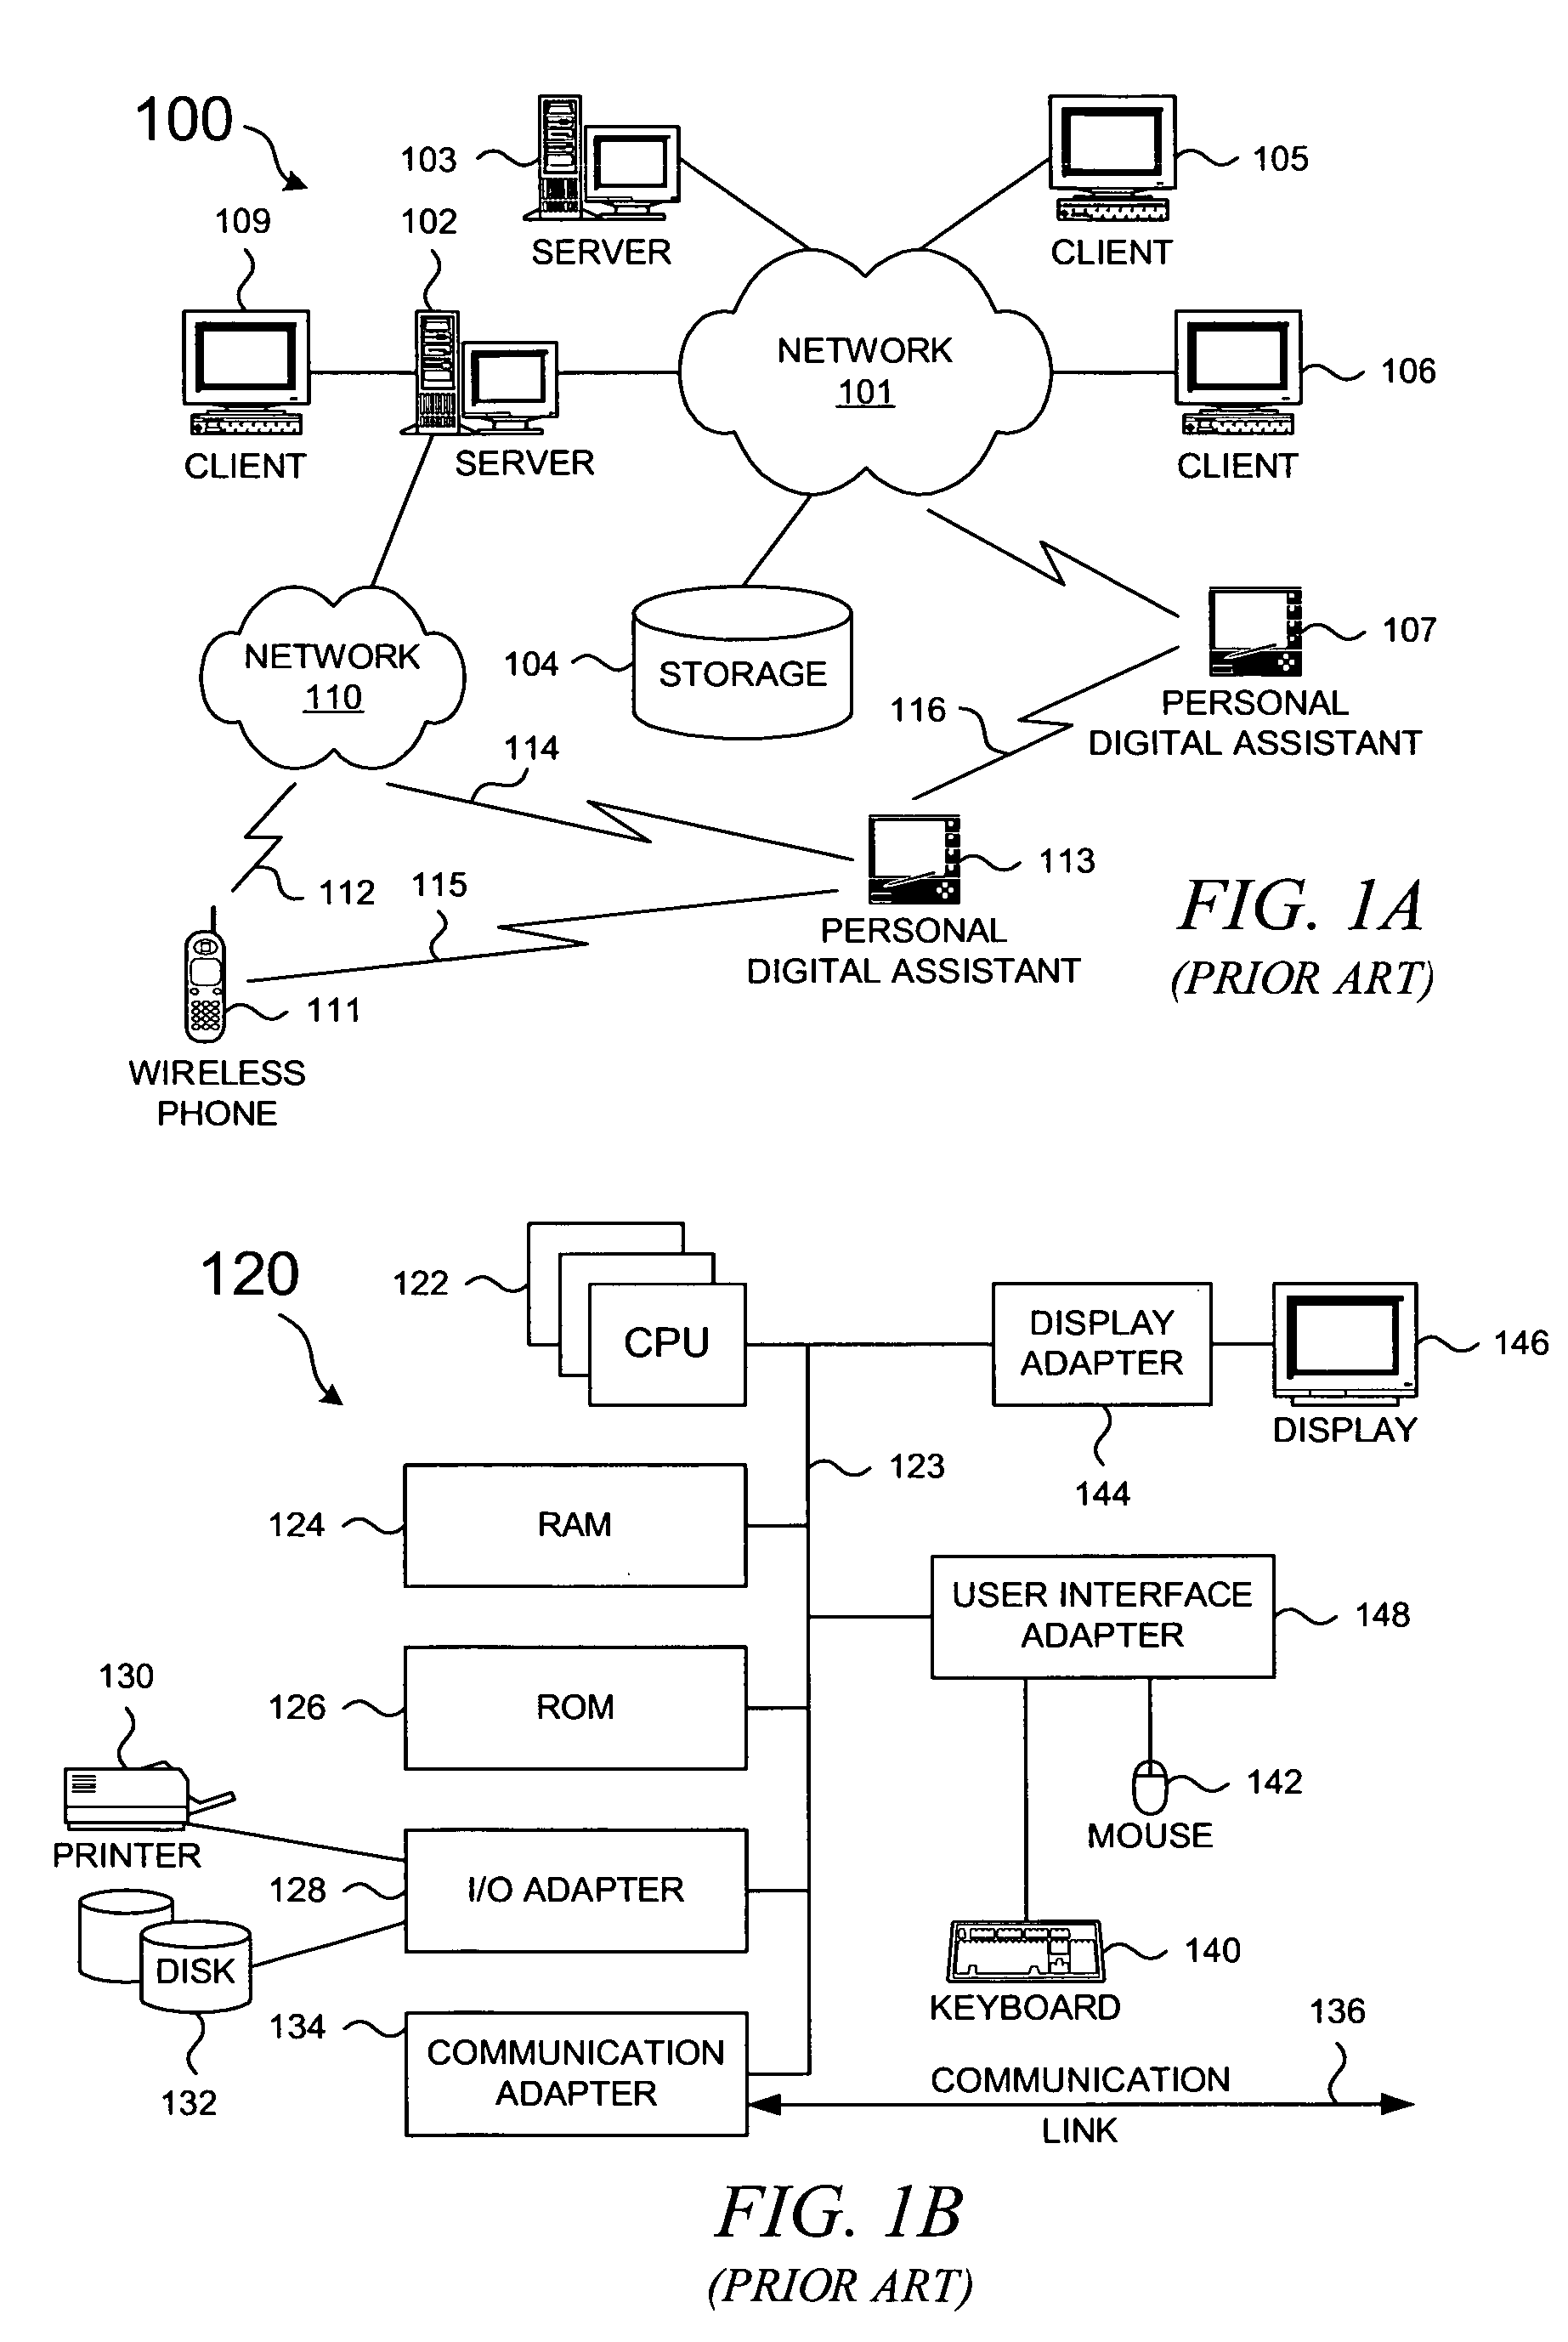 Method and system for a runtime user account creation operation within a single-sign-on process in a federated computing environment